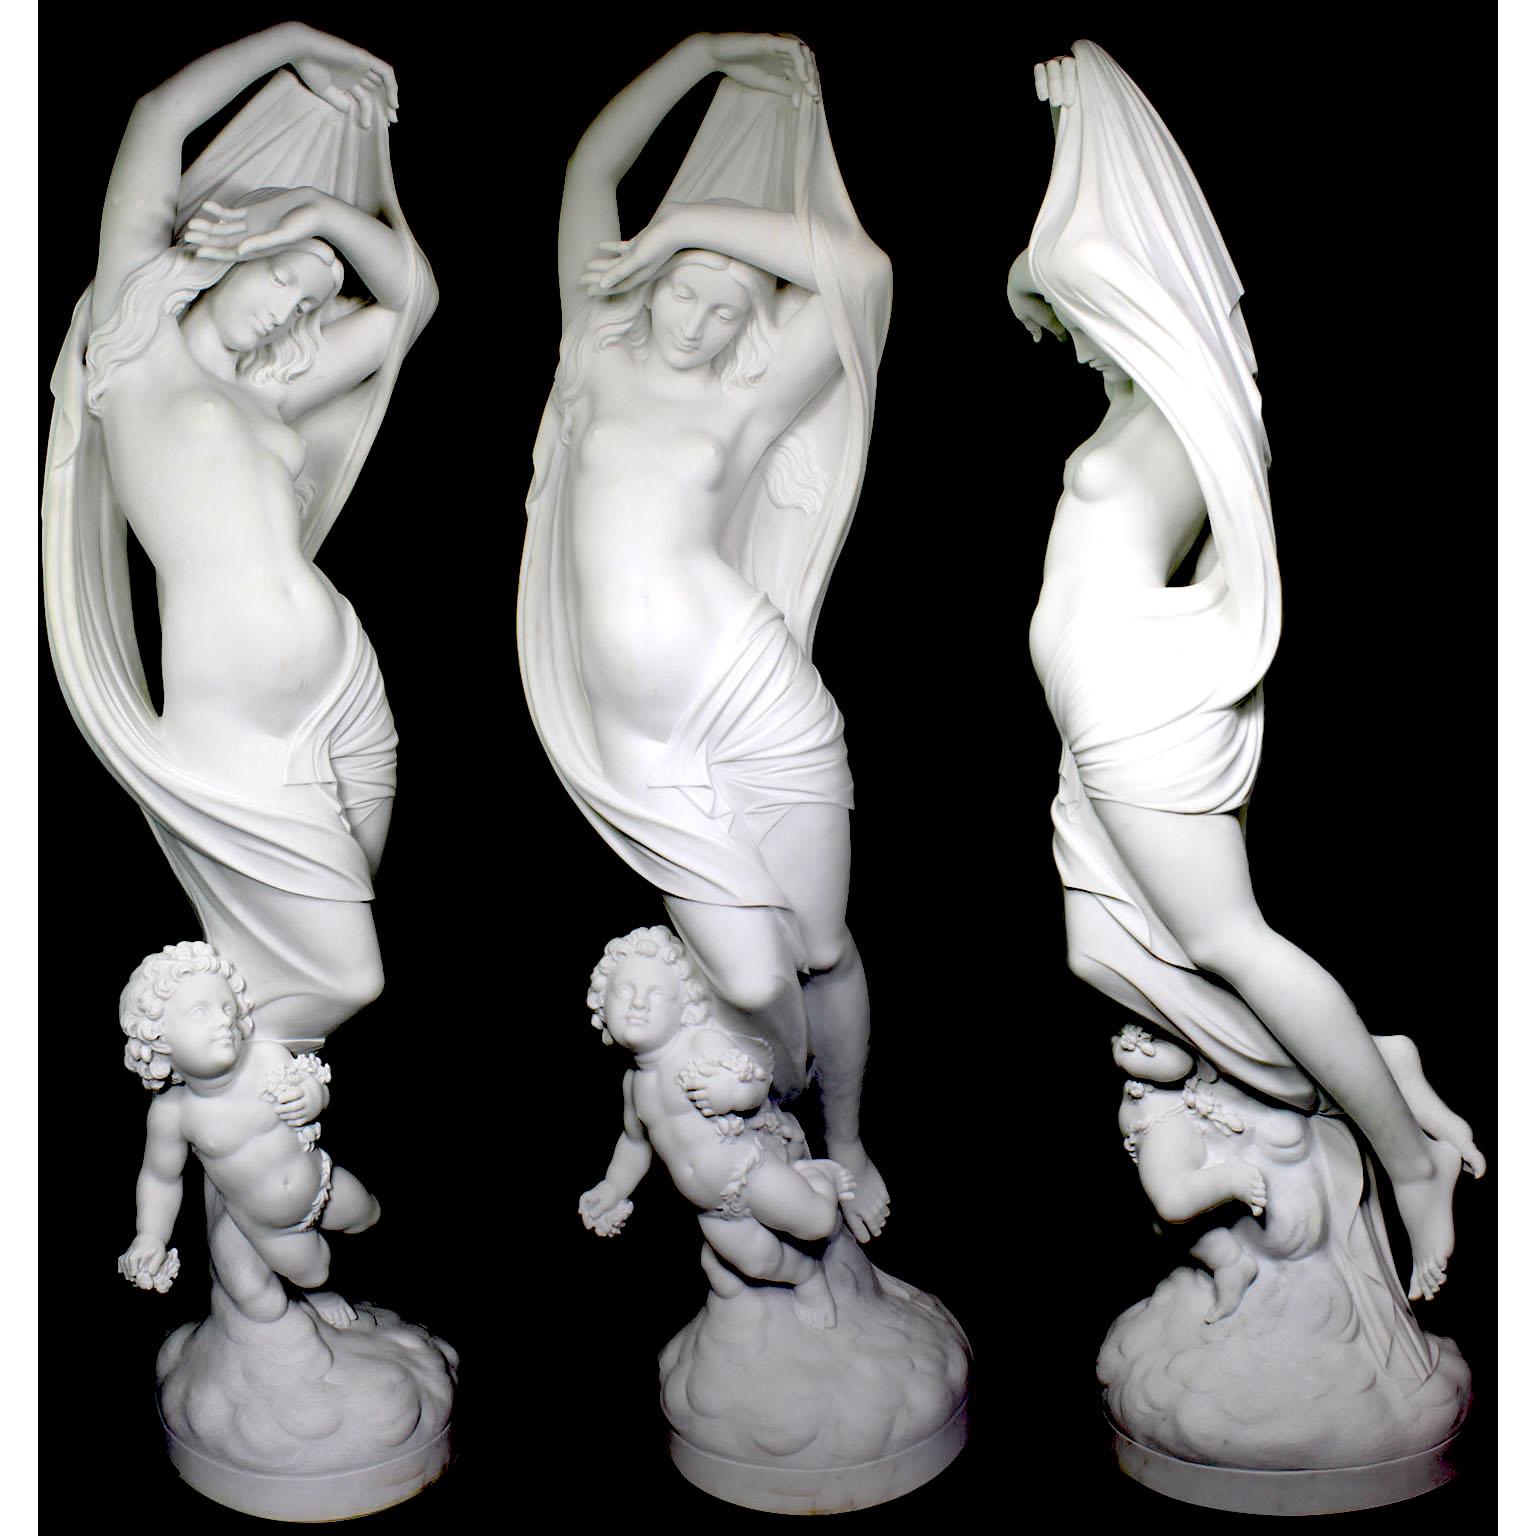 A large beautifully carved white marble sculpture of 